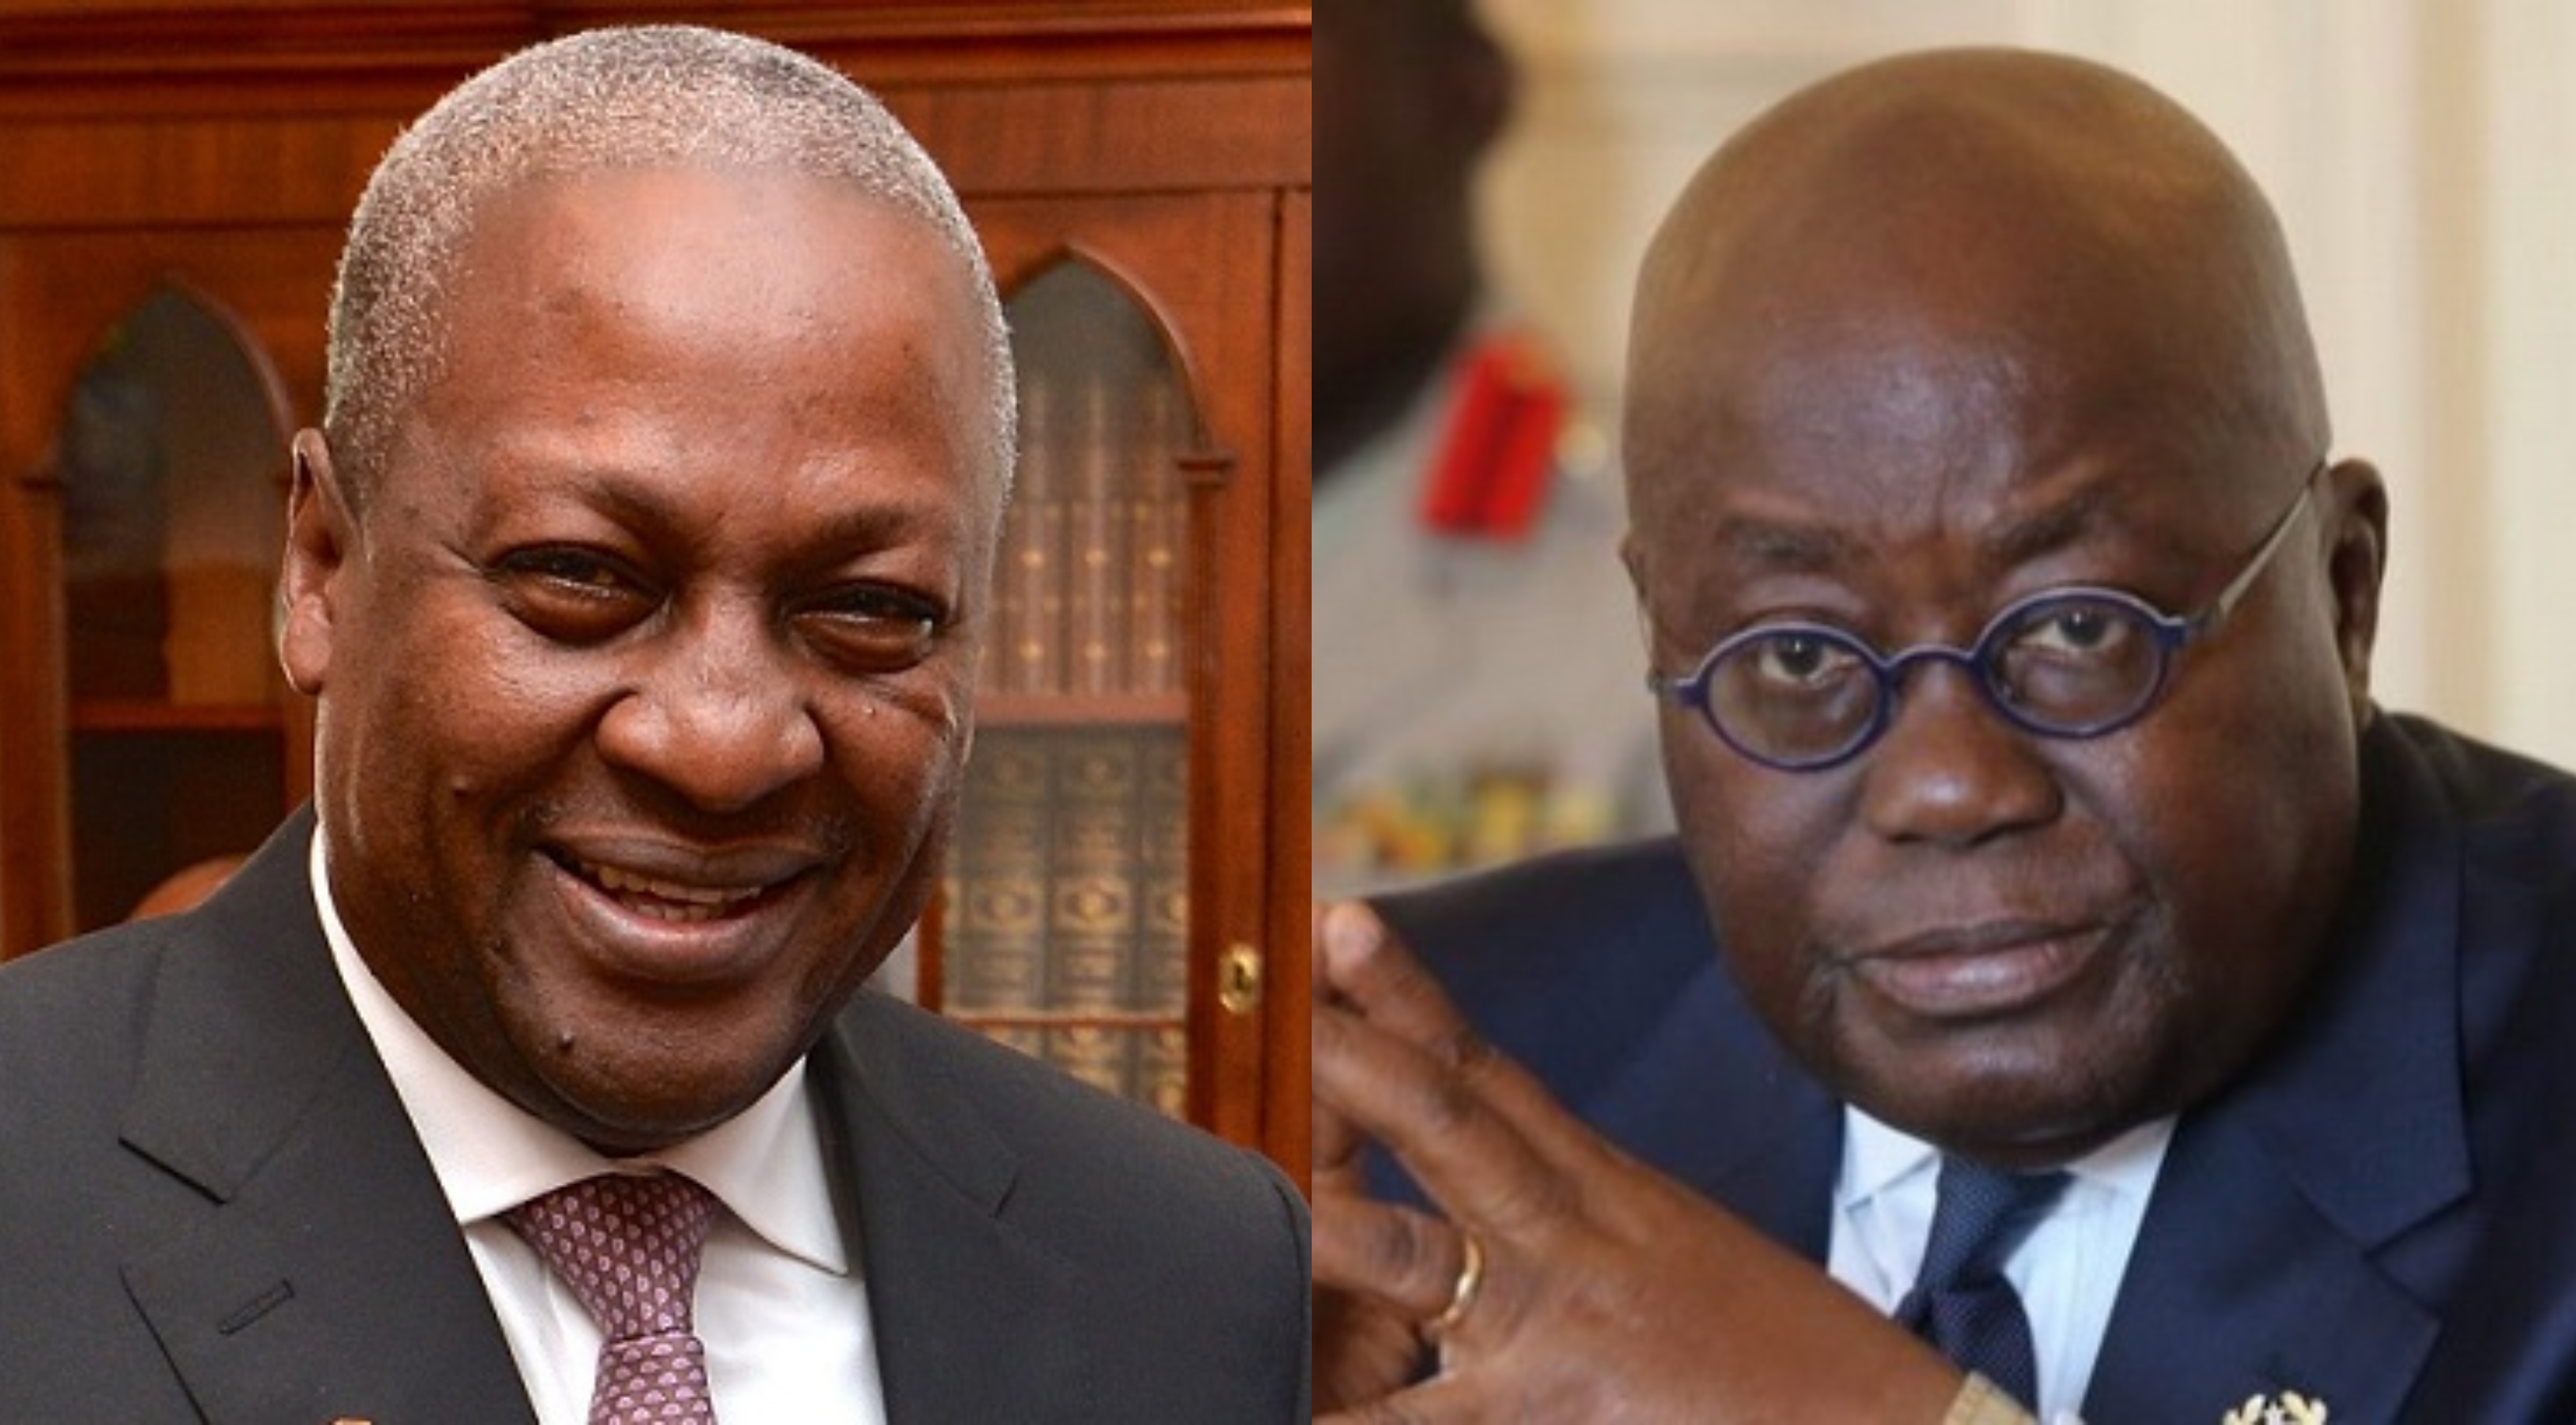 Promise you’ll hand over power if I win 2024 elections – Mahama to Akufo-Addo